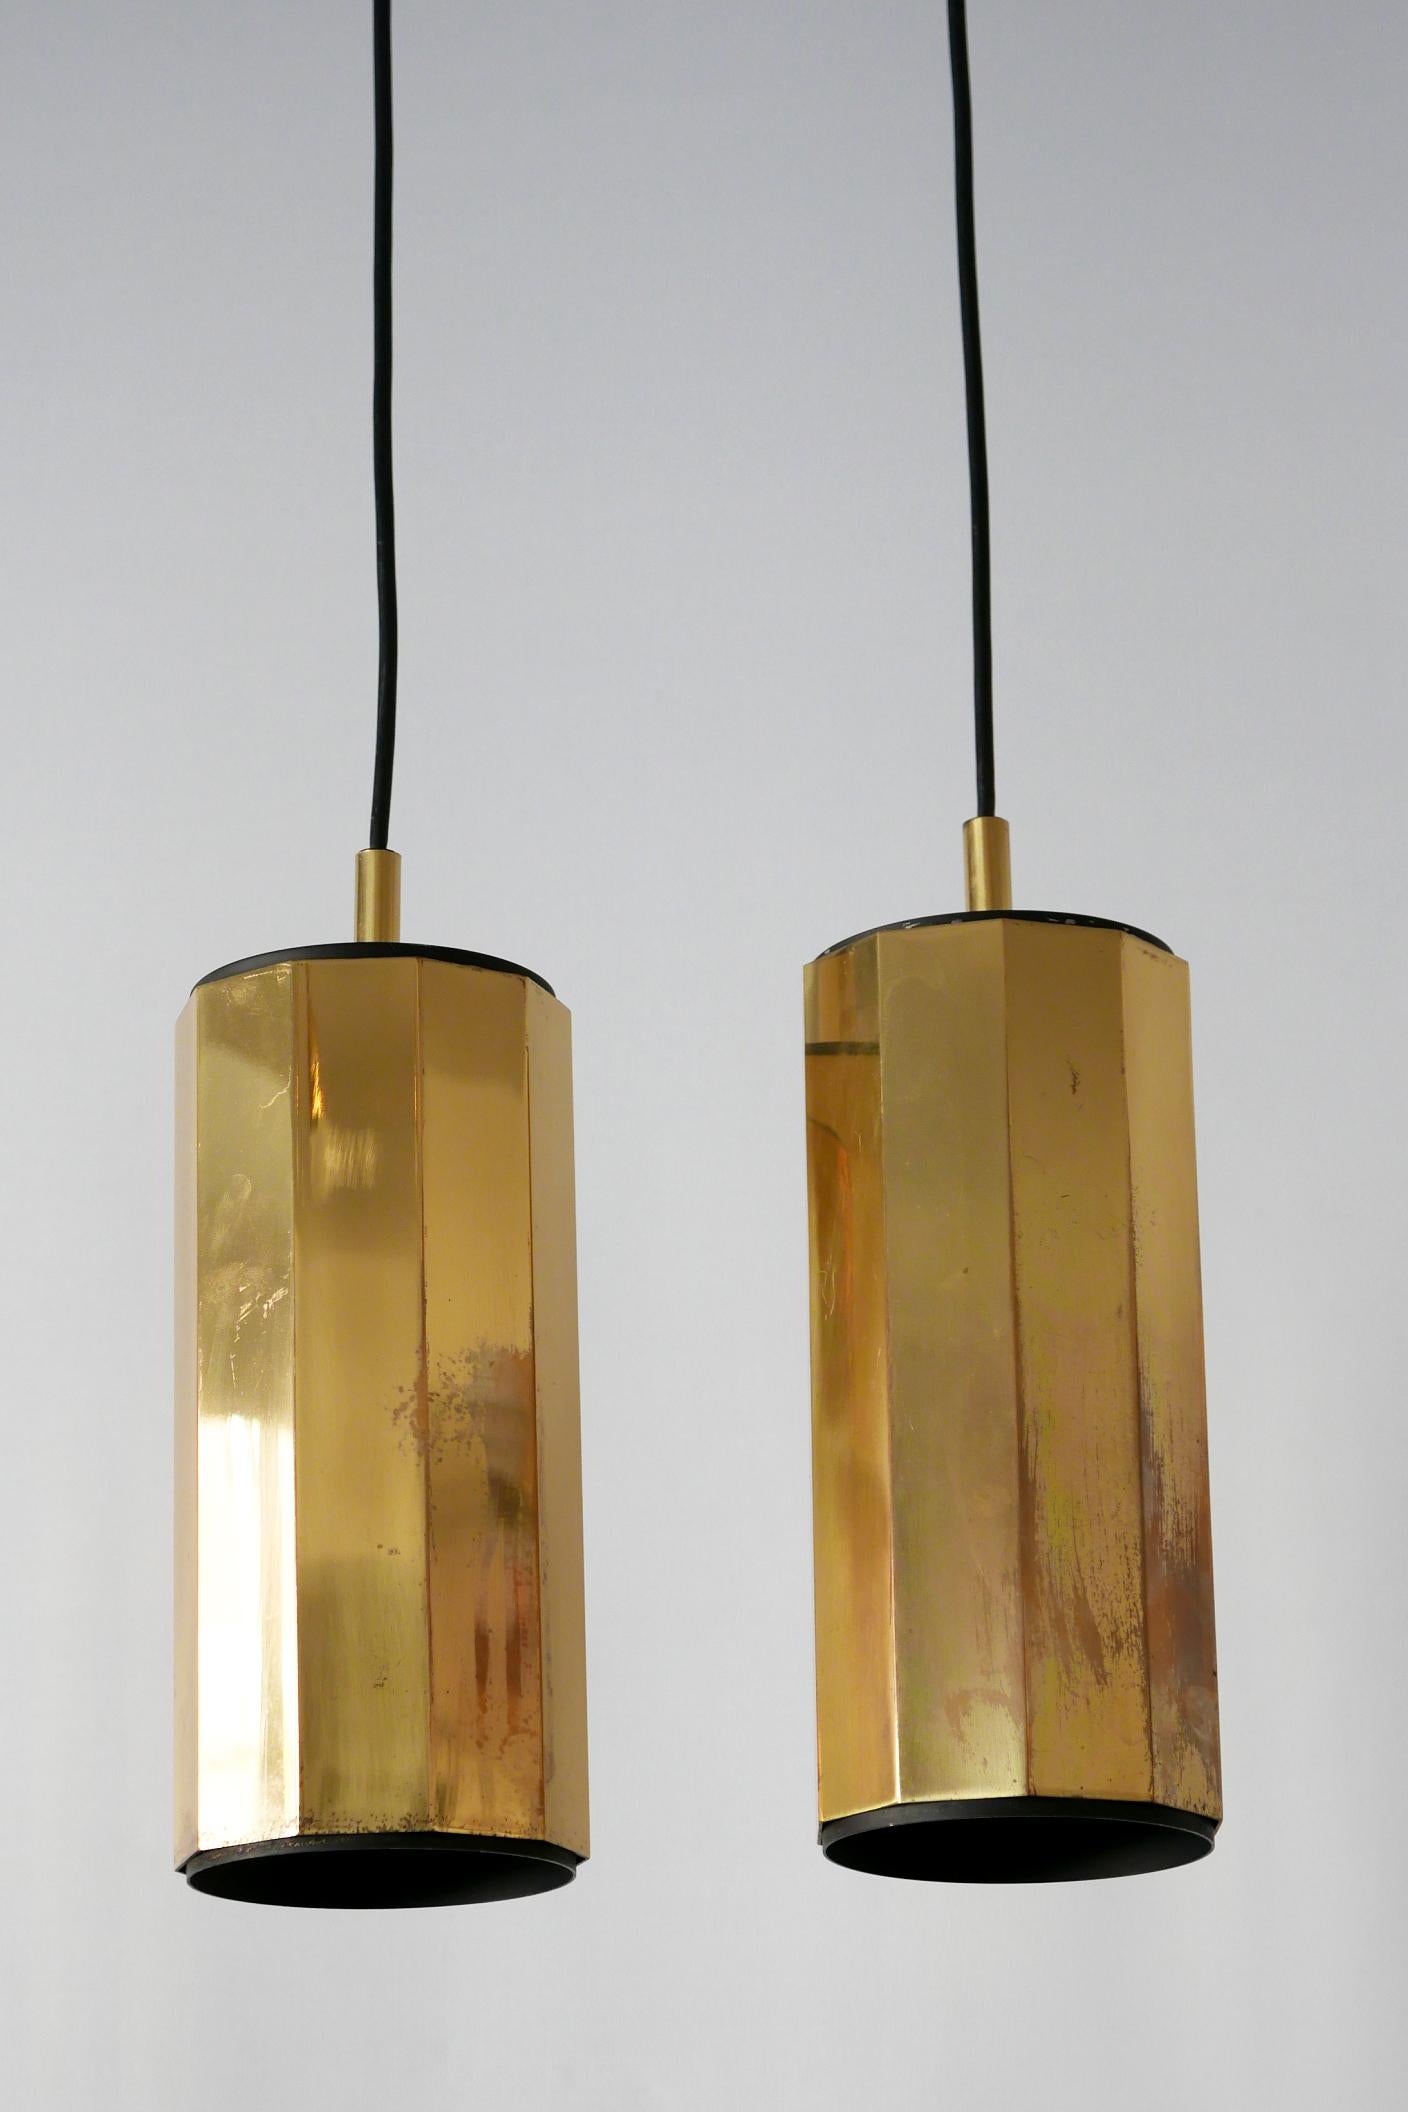 German Set of Two Exceptional Mid-Century Modern Decagonal Brass Pendant Lamps, 1960s